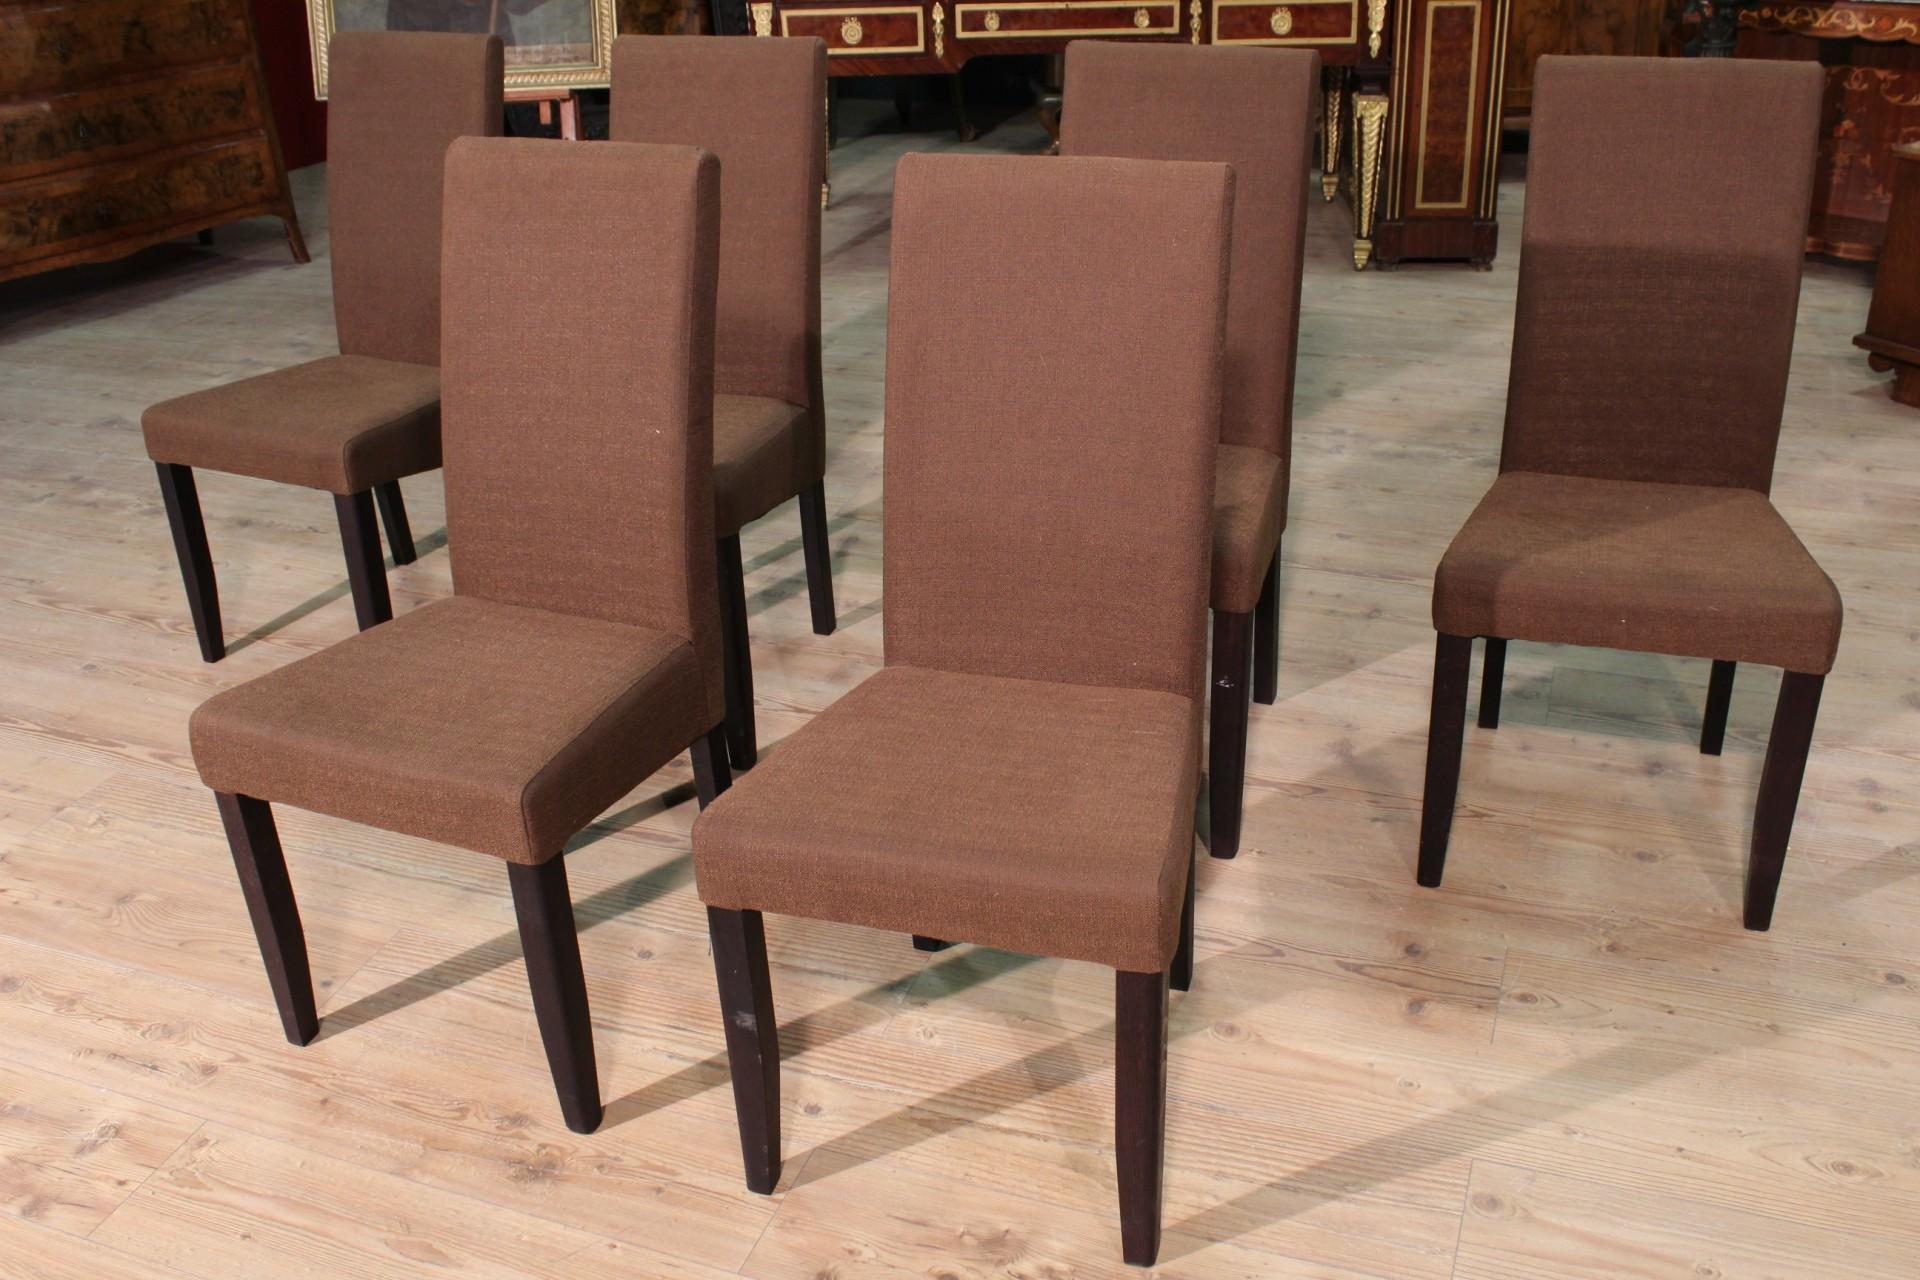 Group of 6 Chairs Covered in Fabric, 20th Century For Sale 8